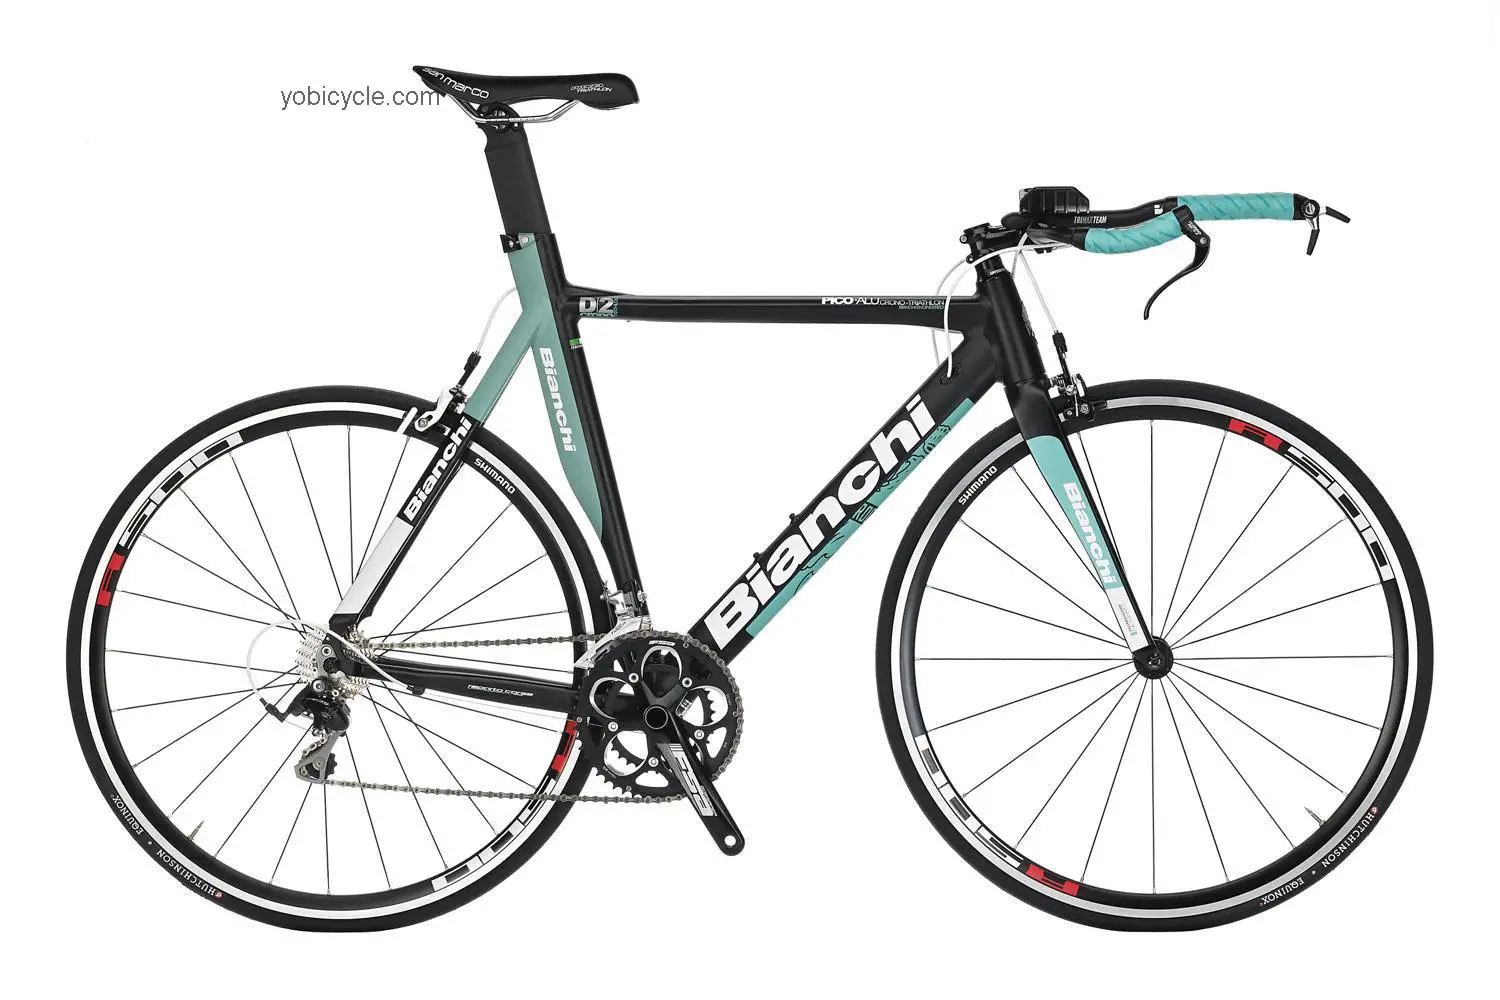 Bianchi Crono 105 competitors and comparison tool online specs and performance